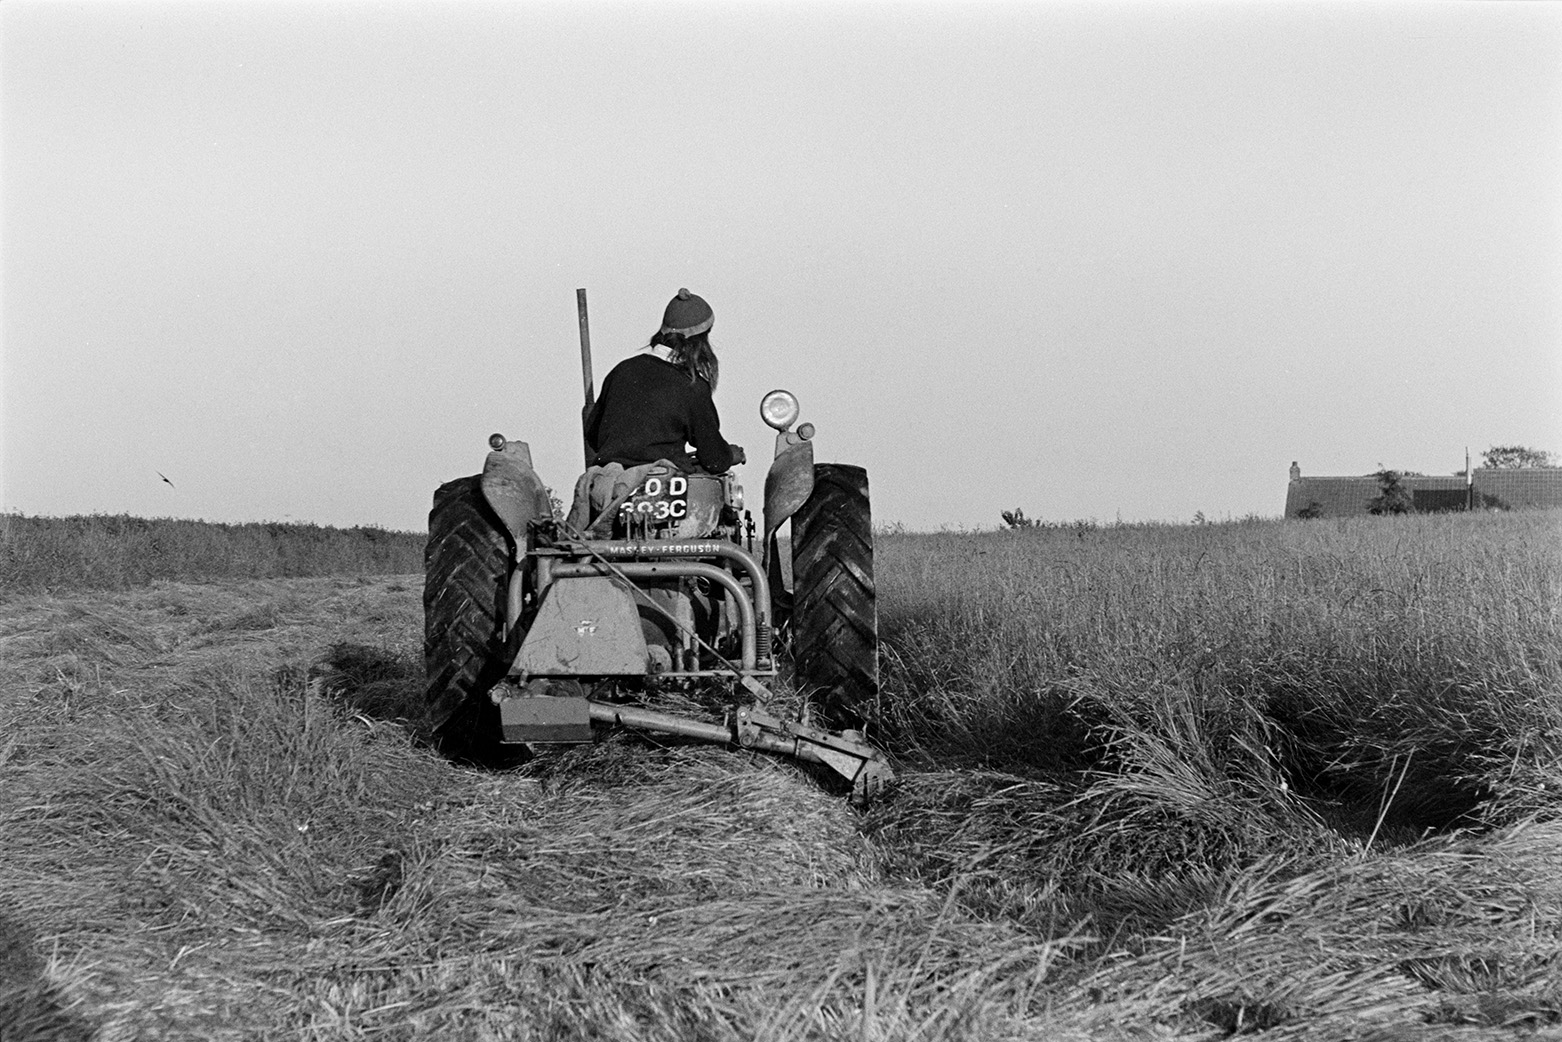 Derek Bright using a tractor and mower to cut hay in a field at Mill Road Farm, Beaford. The farm was also known as Jeffrys.